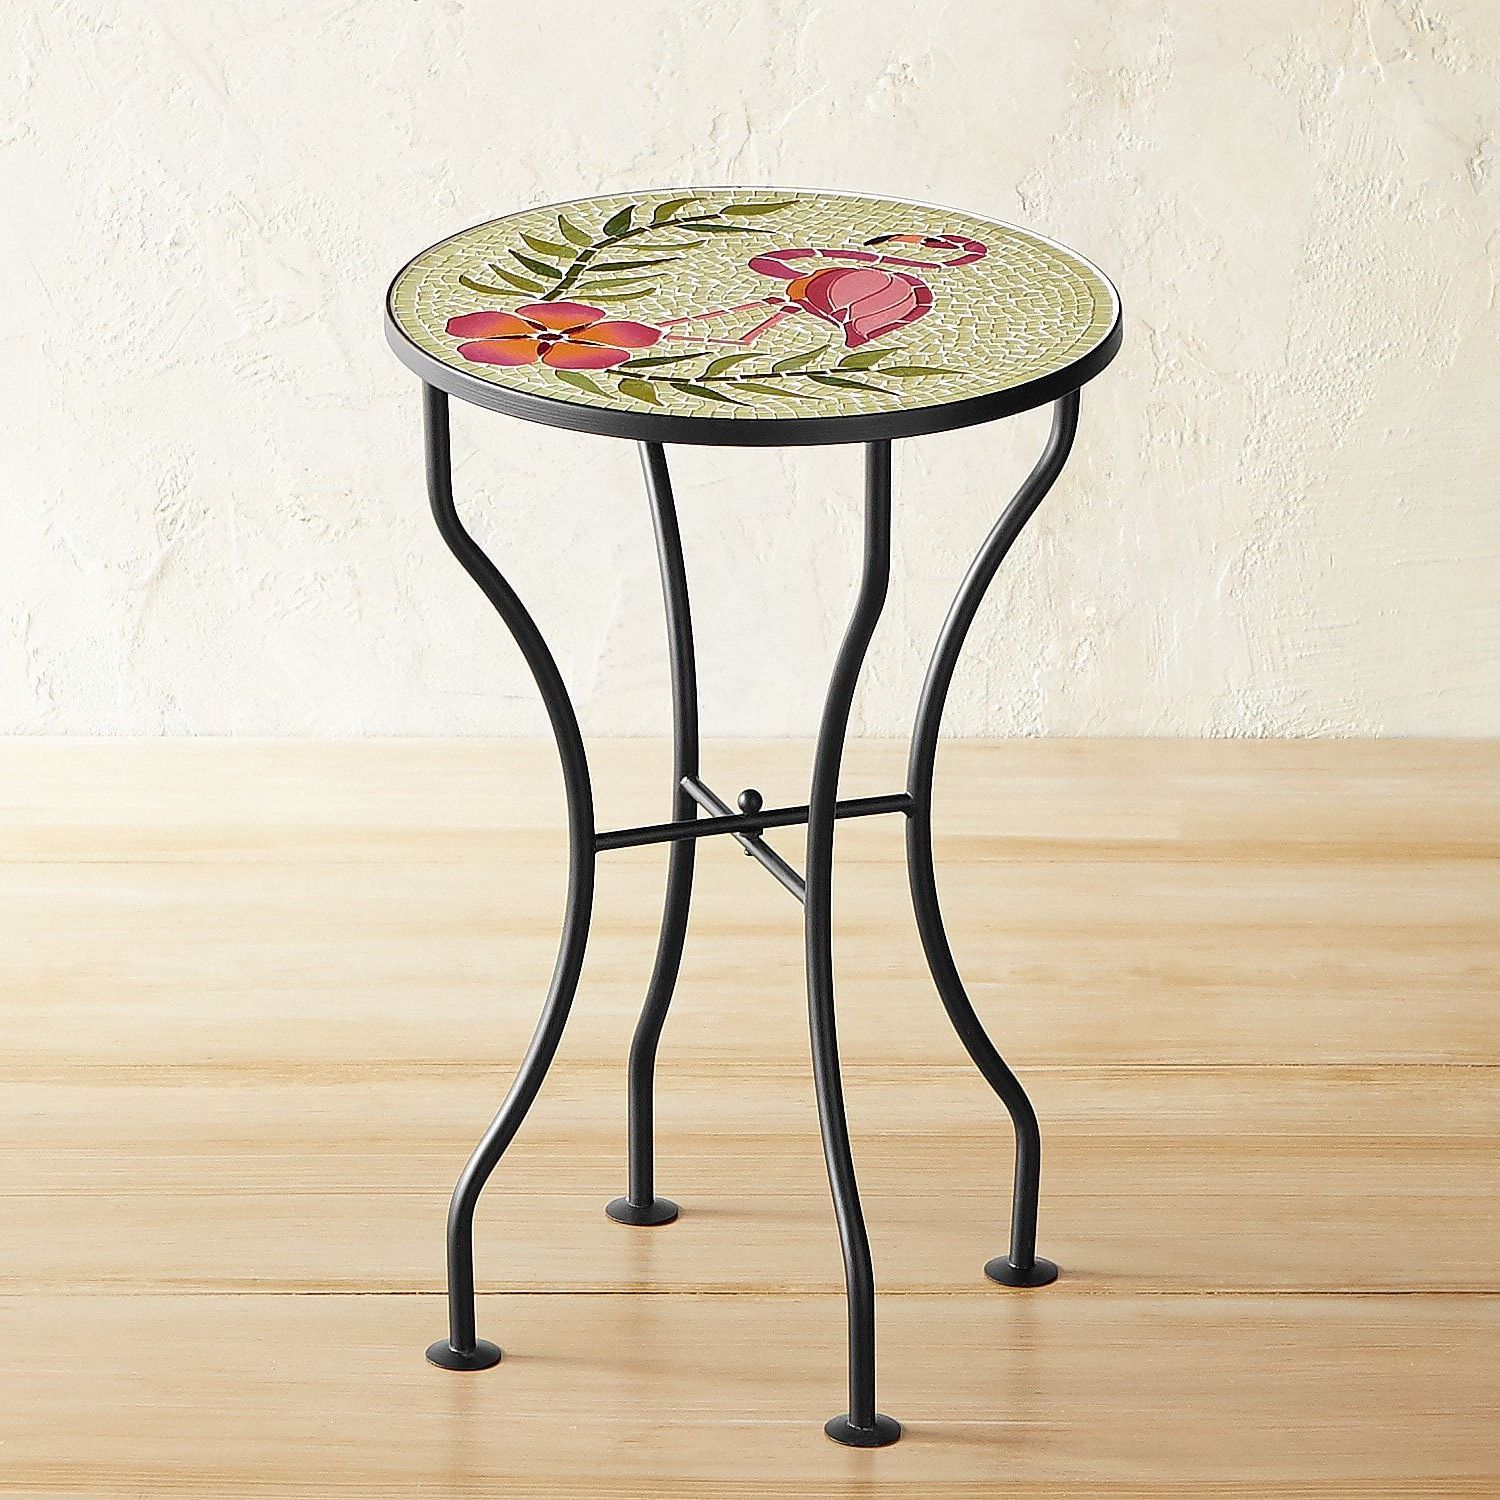 Most Popular Flamingo Mosaic Accent Table (View 4 of 15)